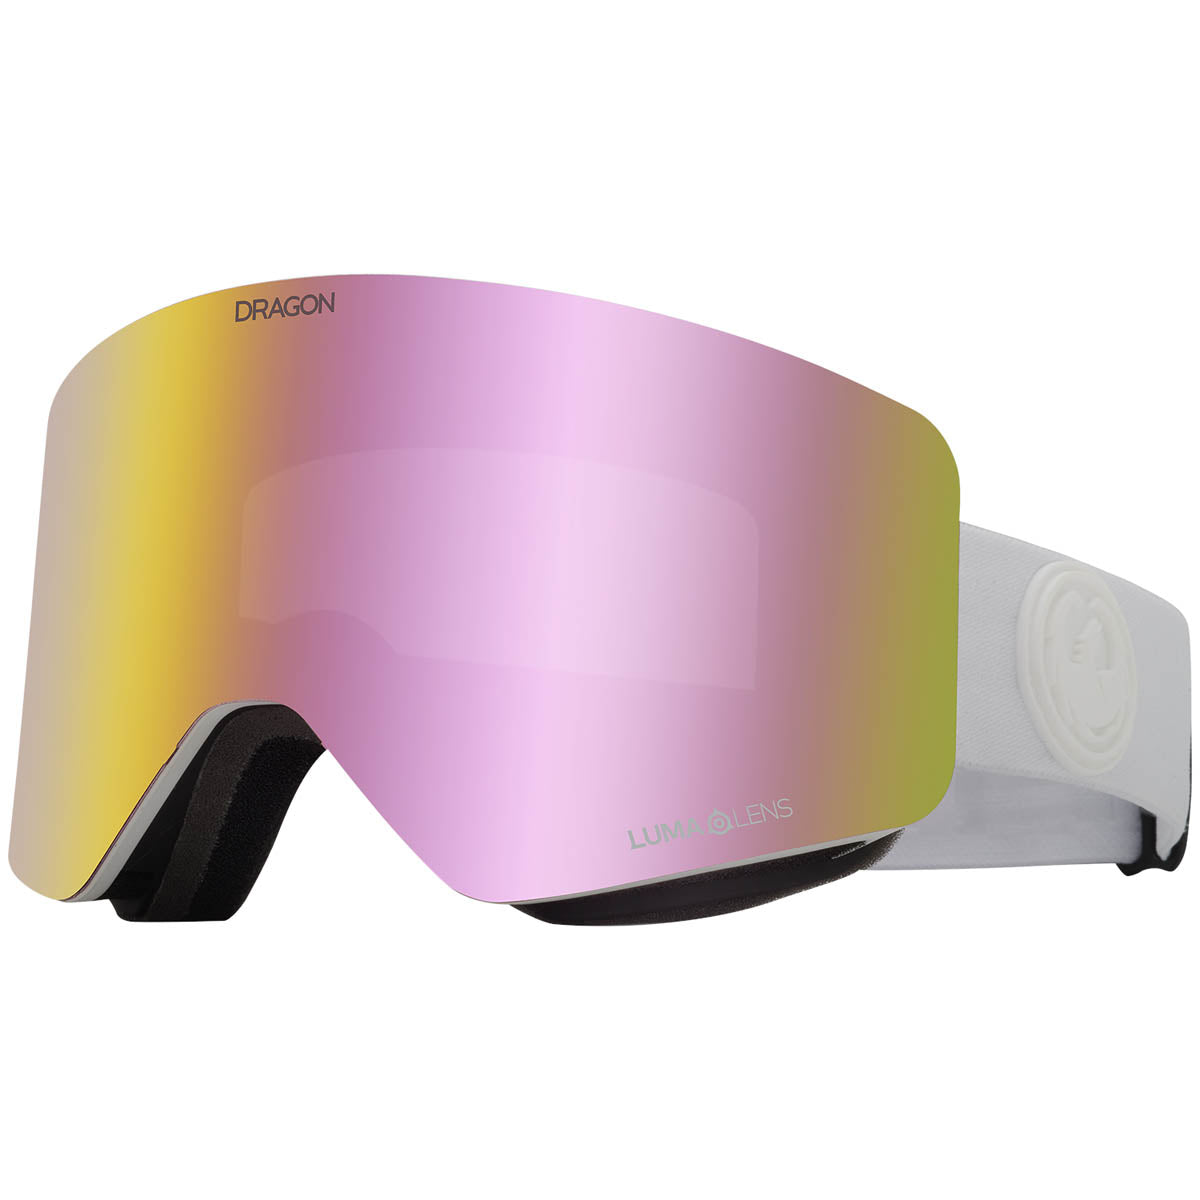 Dragon R1 Otg Snowboard Goggles - Whiteout/Lumalens Pink Ion image 1